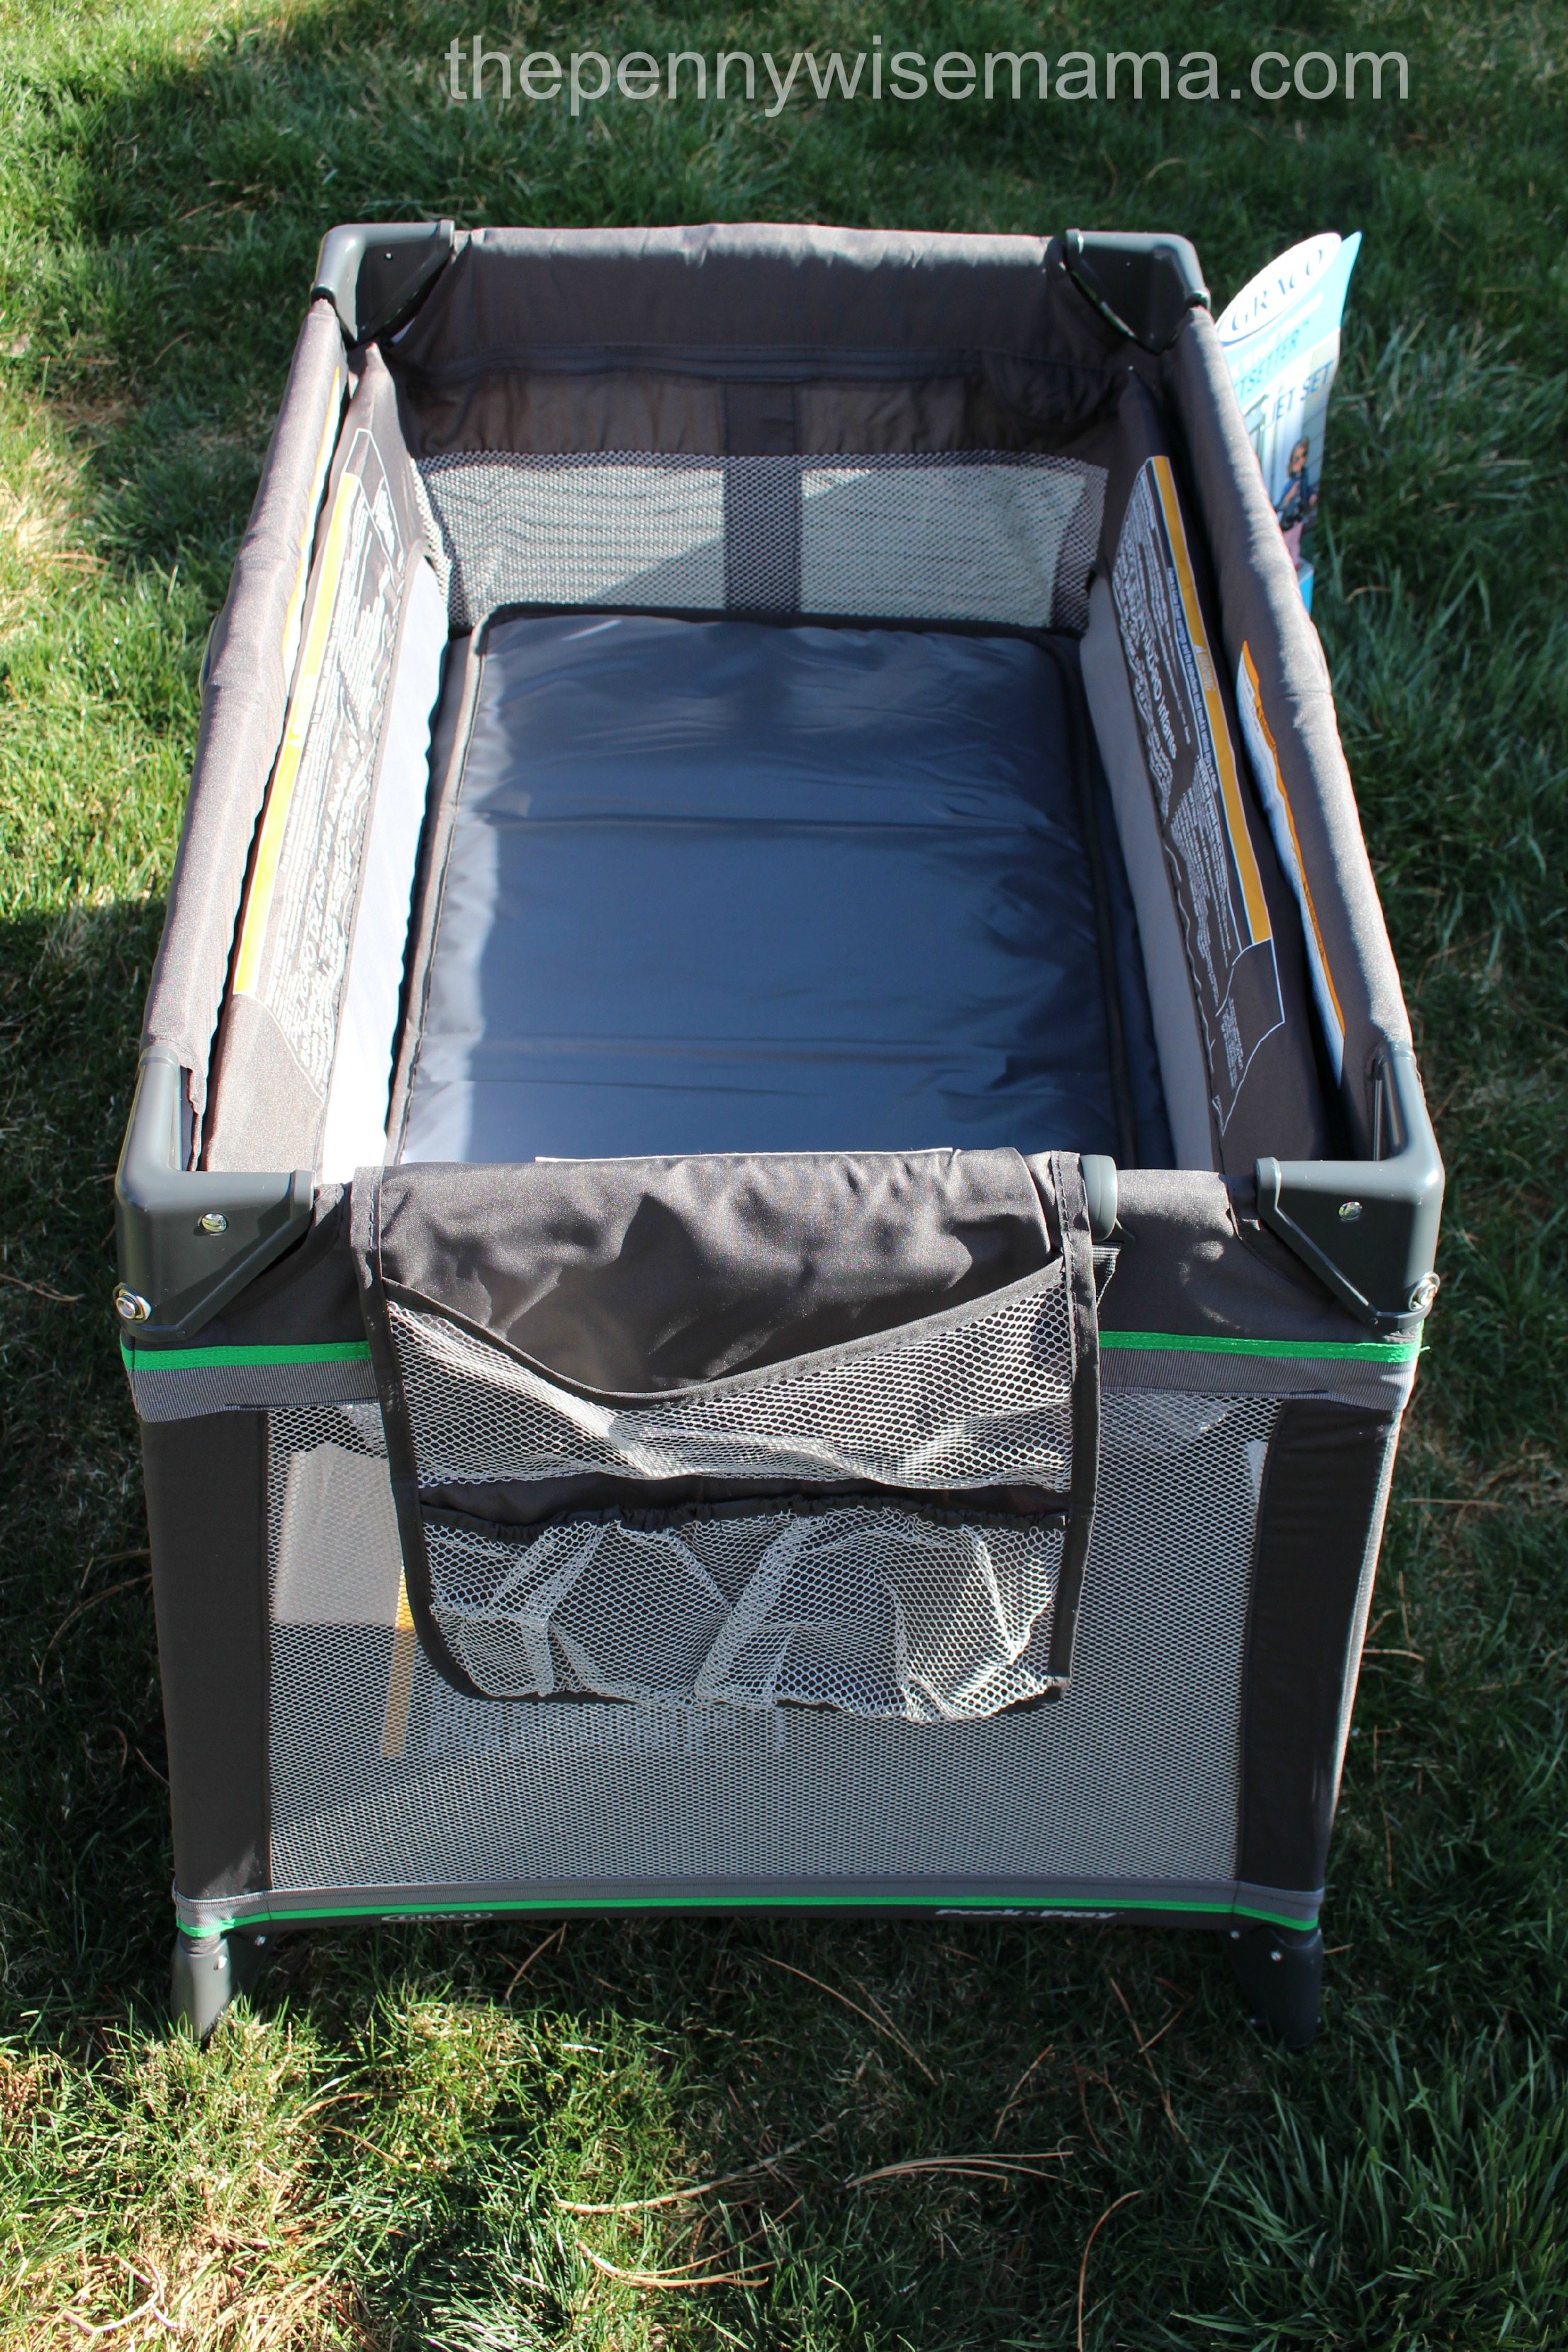 graco jetsetter pack and play